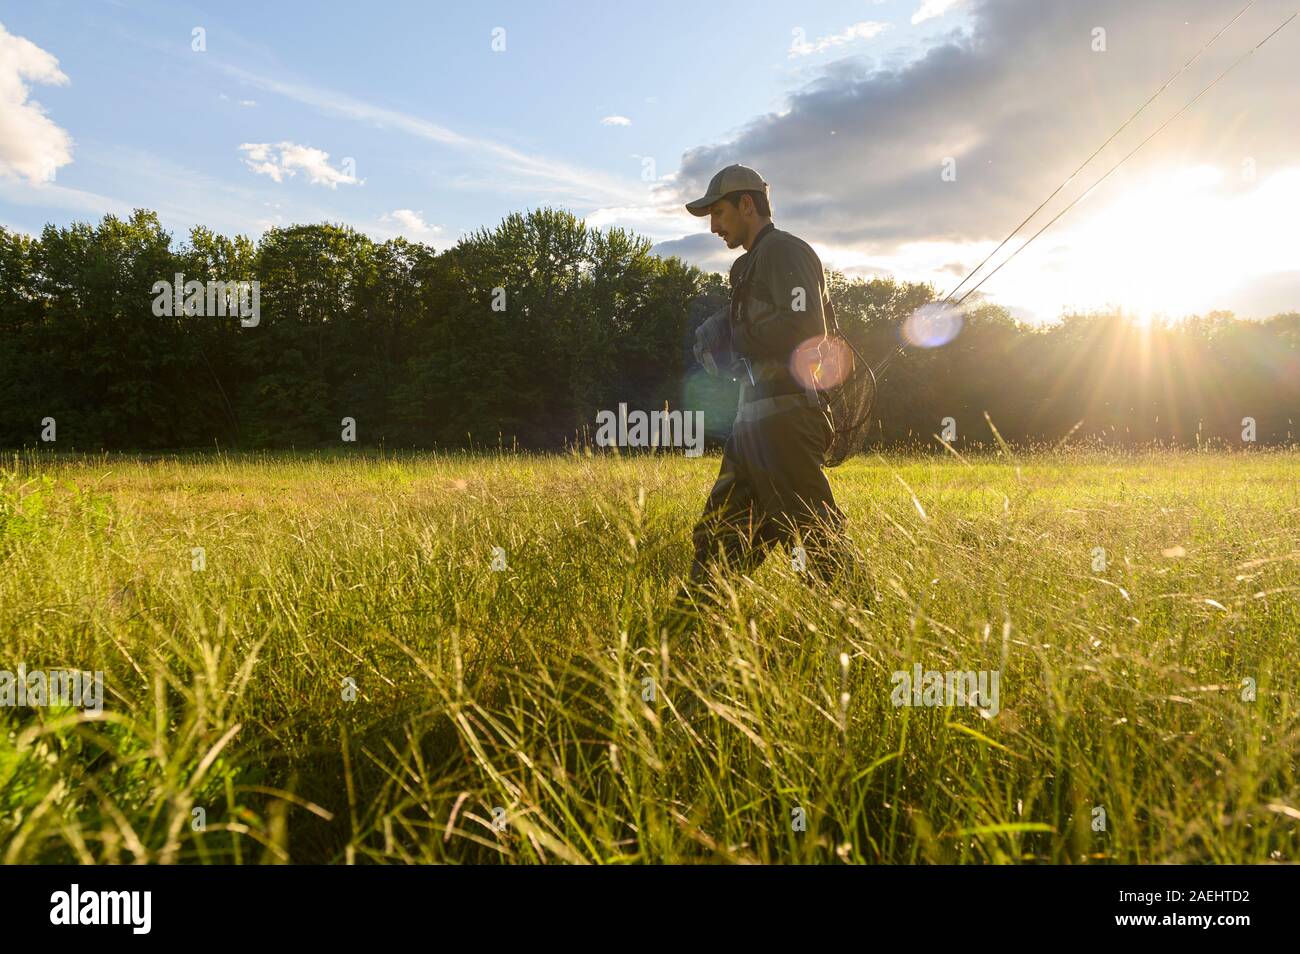 A fly fisherman walking in a green field on a summer day. Stock Photo